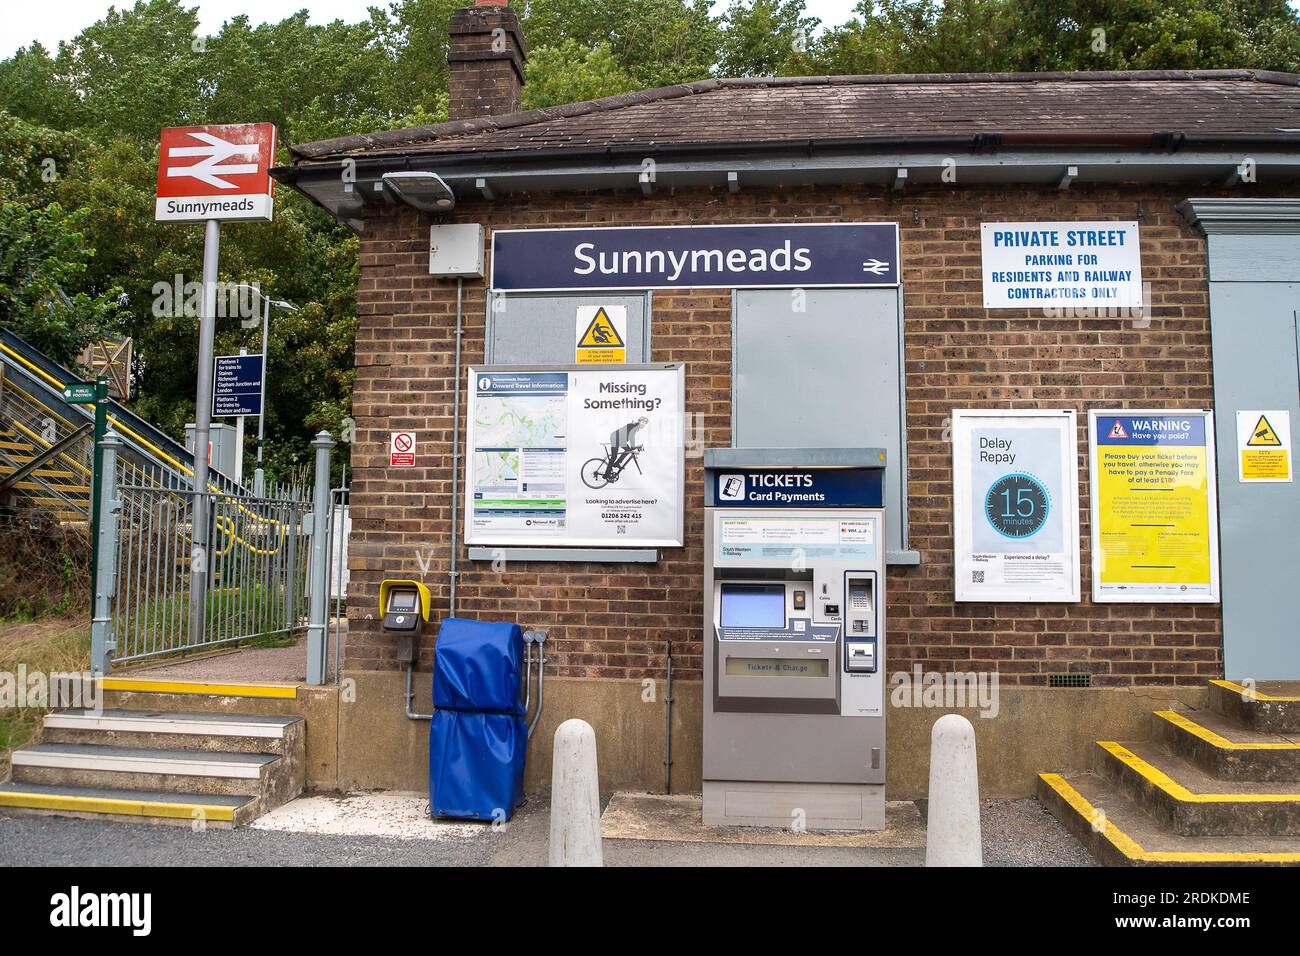 Sunnymeads, Wraysbury, UK. 22nd July, 2023. Sunnymeads Railway Station in Berkshire. No trains are running to and from Waterloo today from Sunnymeads due to Industrial Action by South Western Railway rail workers. RMT Strikes are taking place across parts of the rail network in England today in an ongoing dispute about pay and the closure of railyway station ticket offices. The Rail Industry Body, The Rail Delivery Group have announced that plans to close the majority of all railway station ticket offices in England have been confirmed.  This is a huge blow to rail workers, many of whom, fear Stock Photo